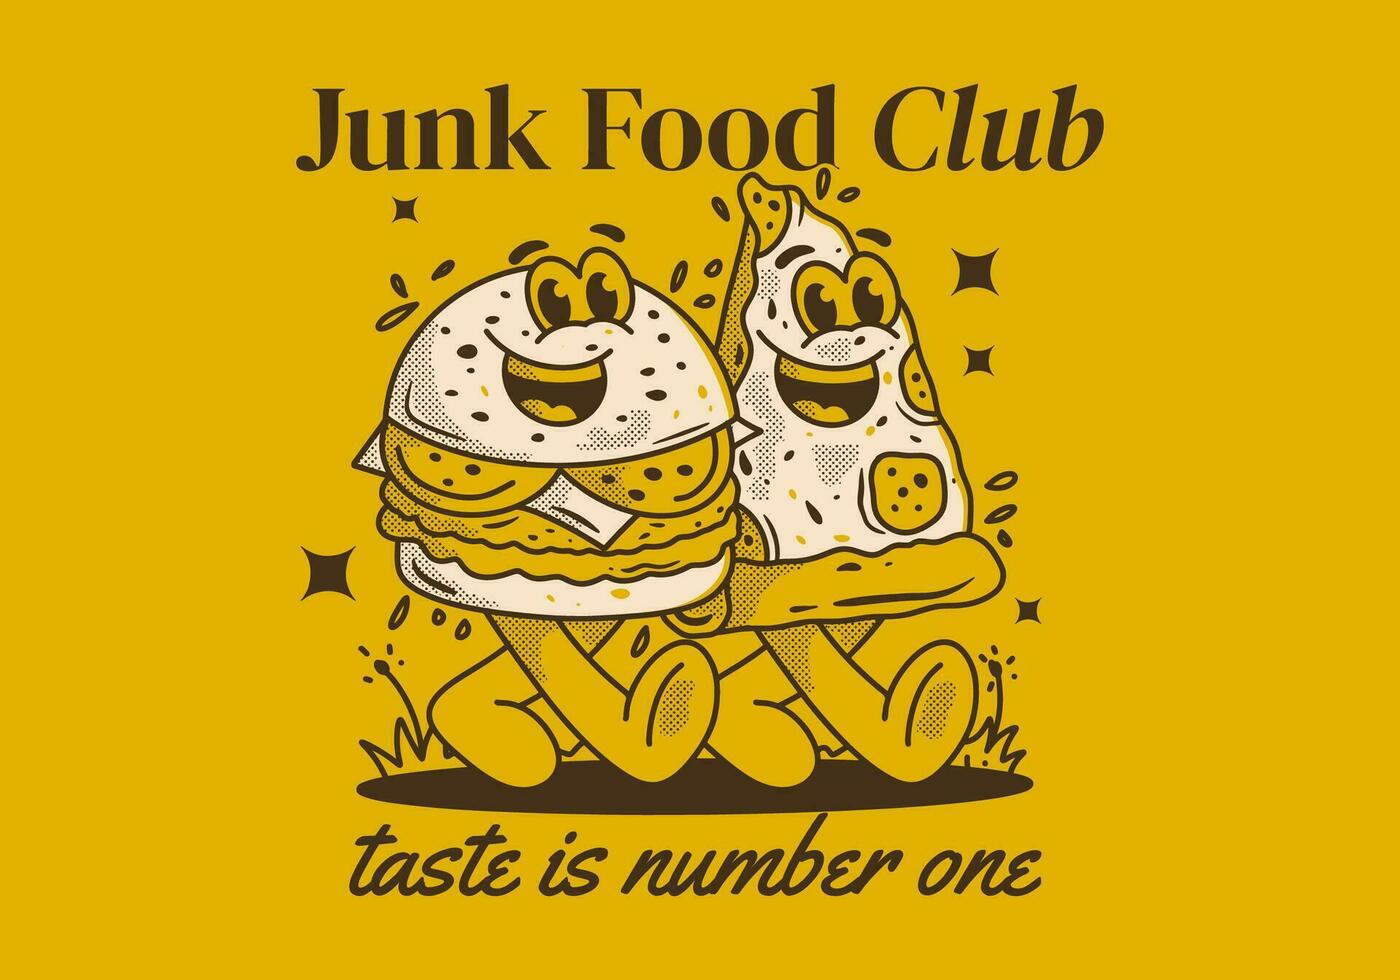 Junk Food club, taste is number one. Character illustration of walking burger and pizza vector